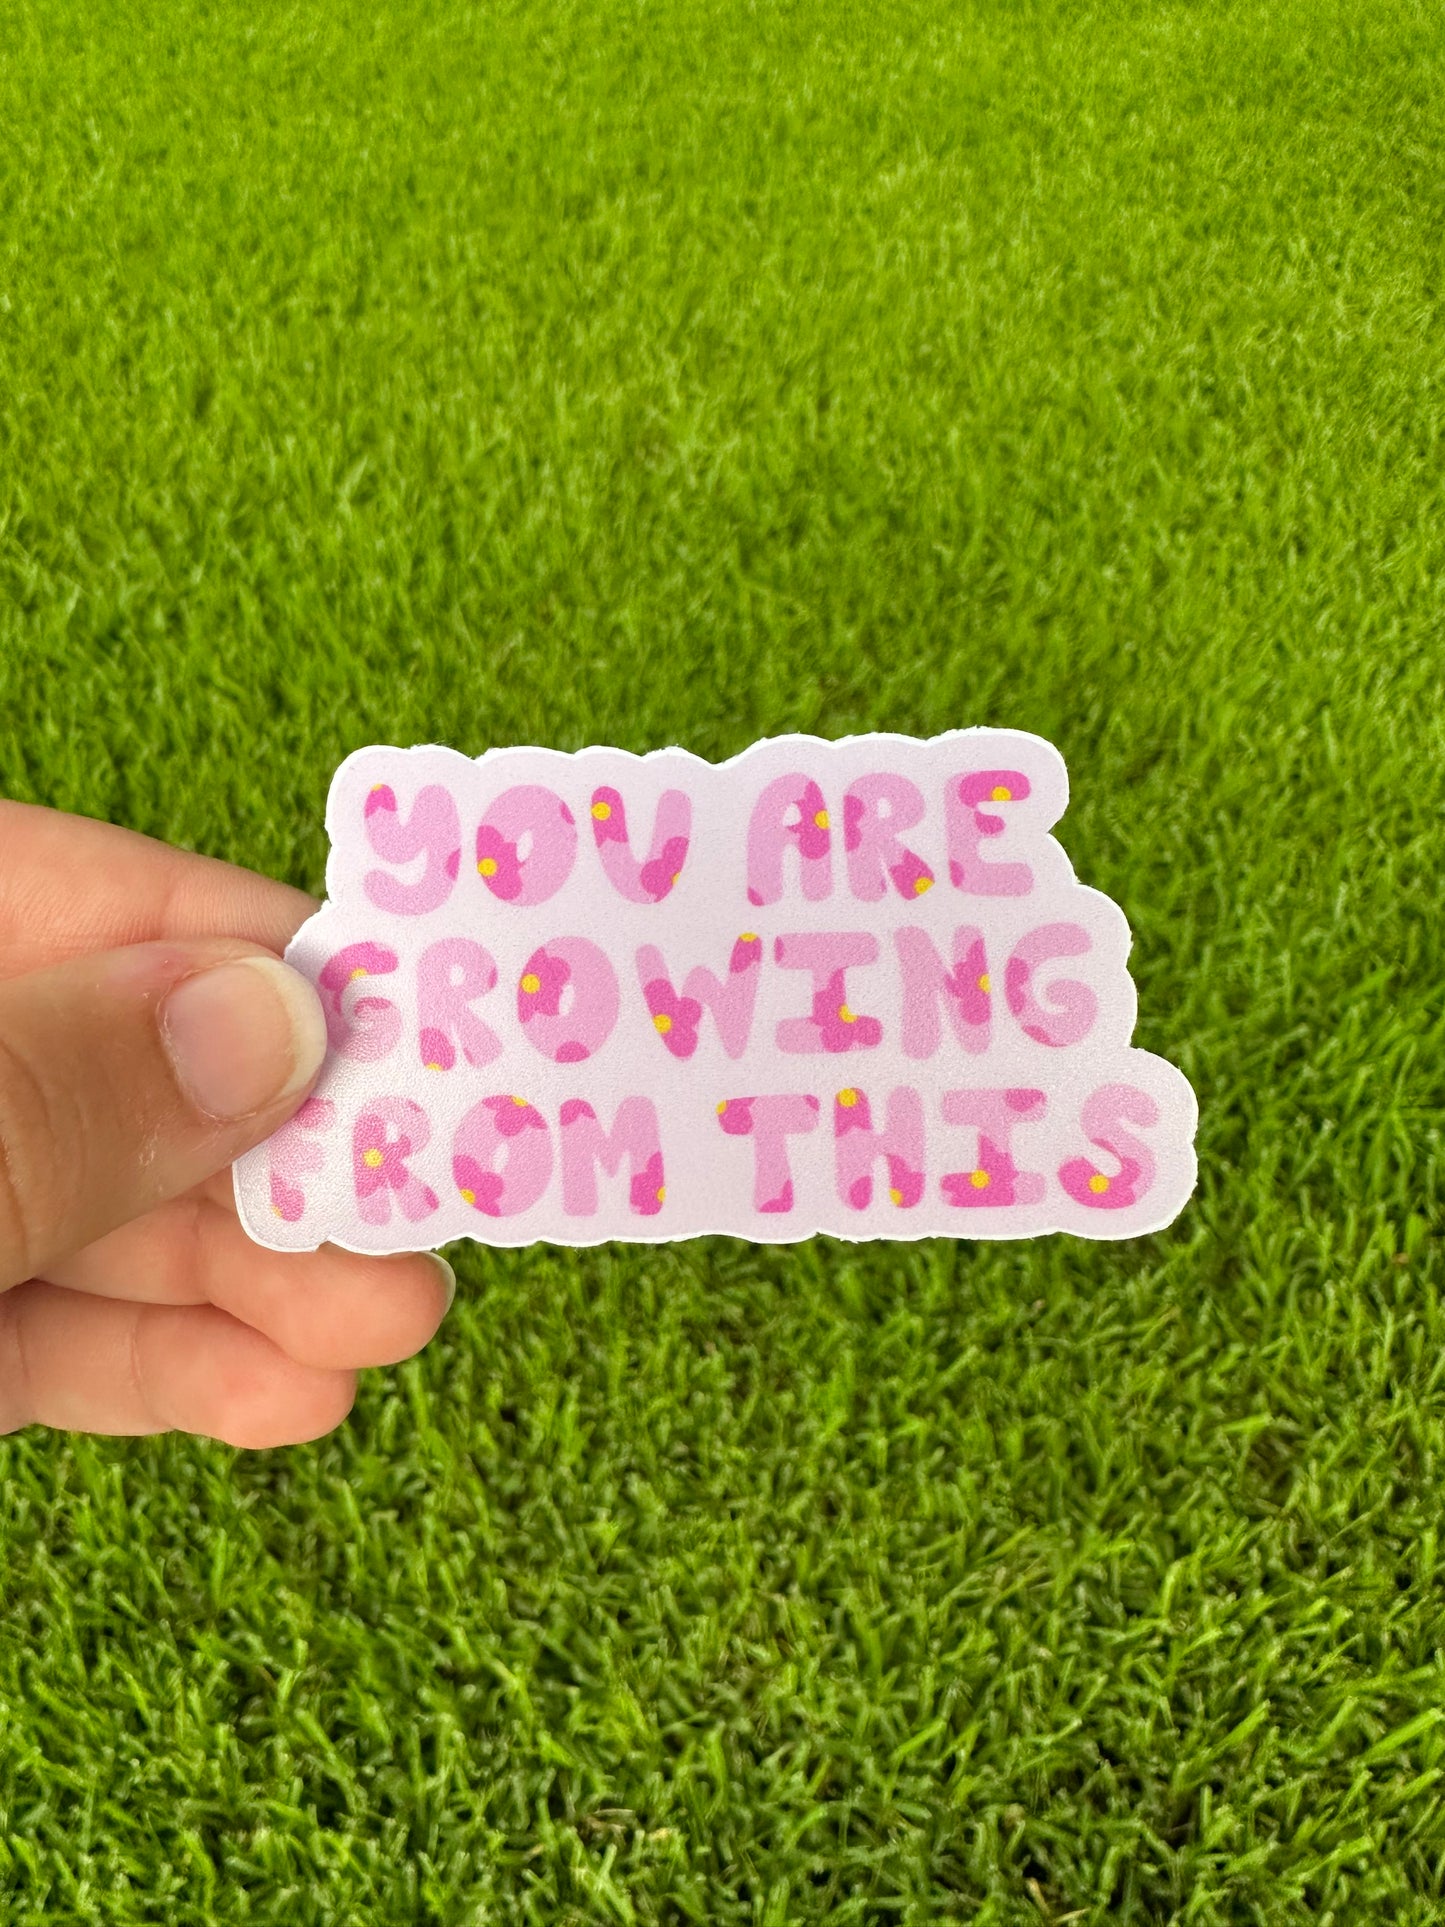 You Are Growing From This Sticker